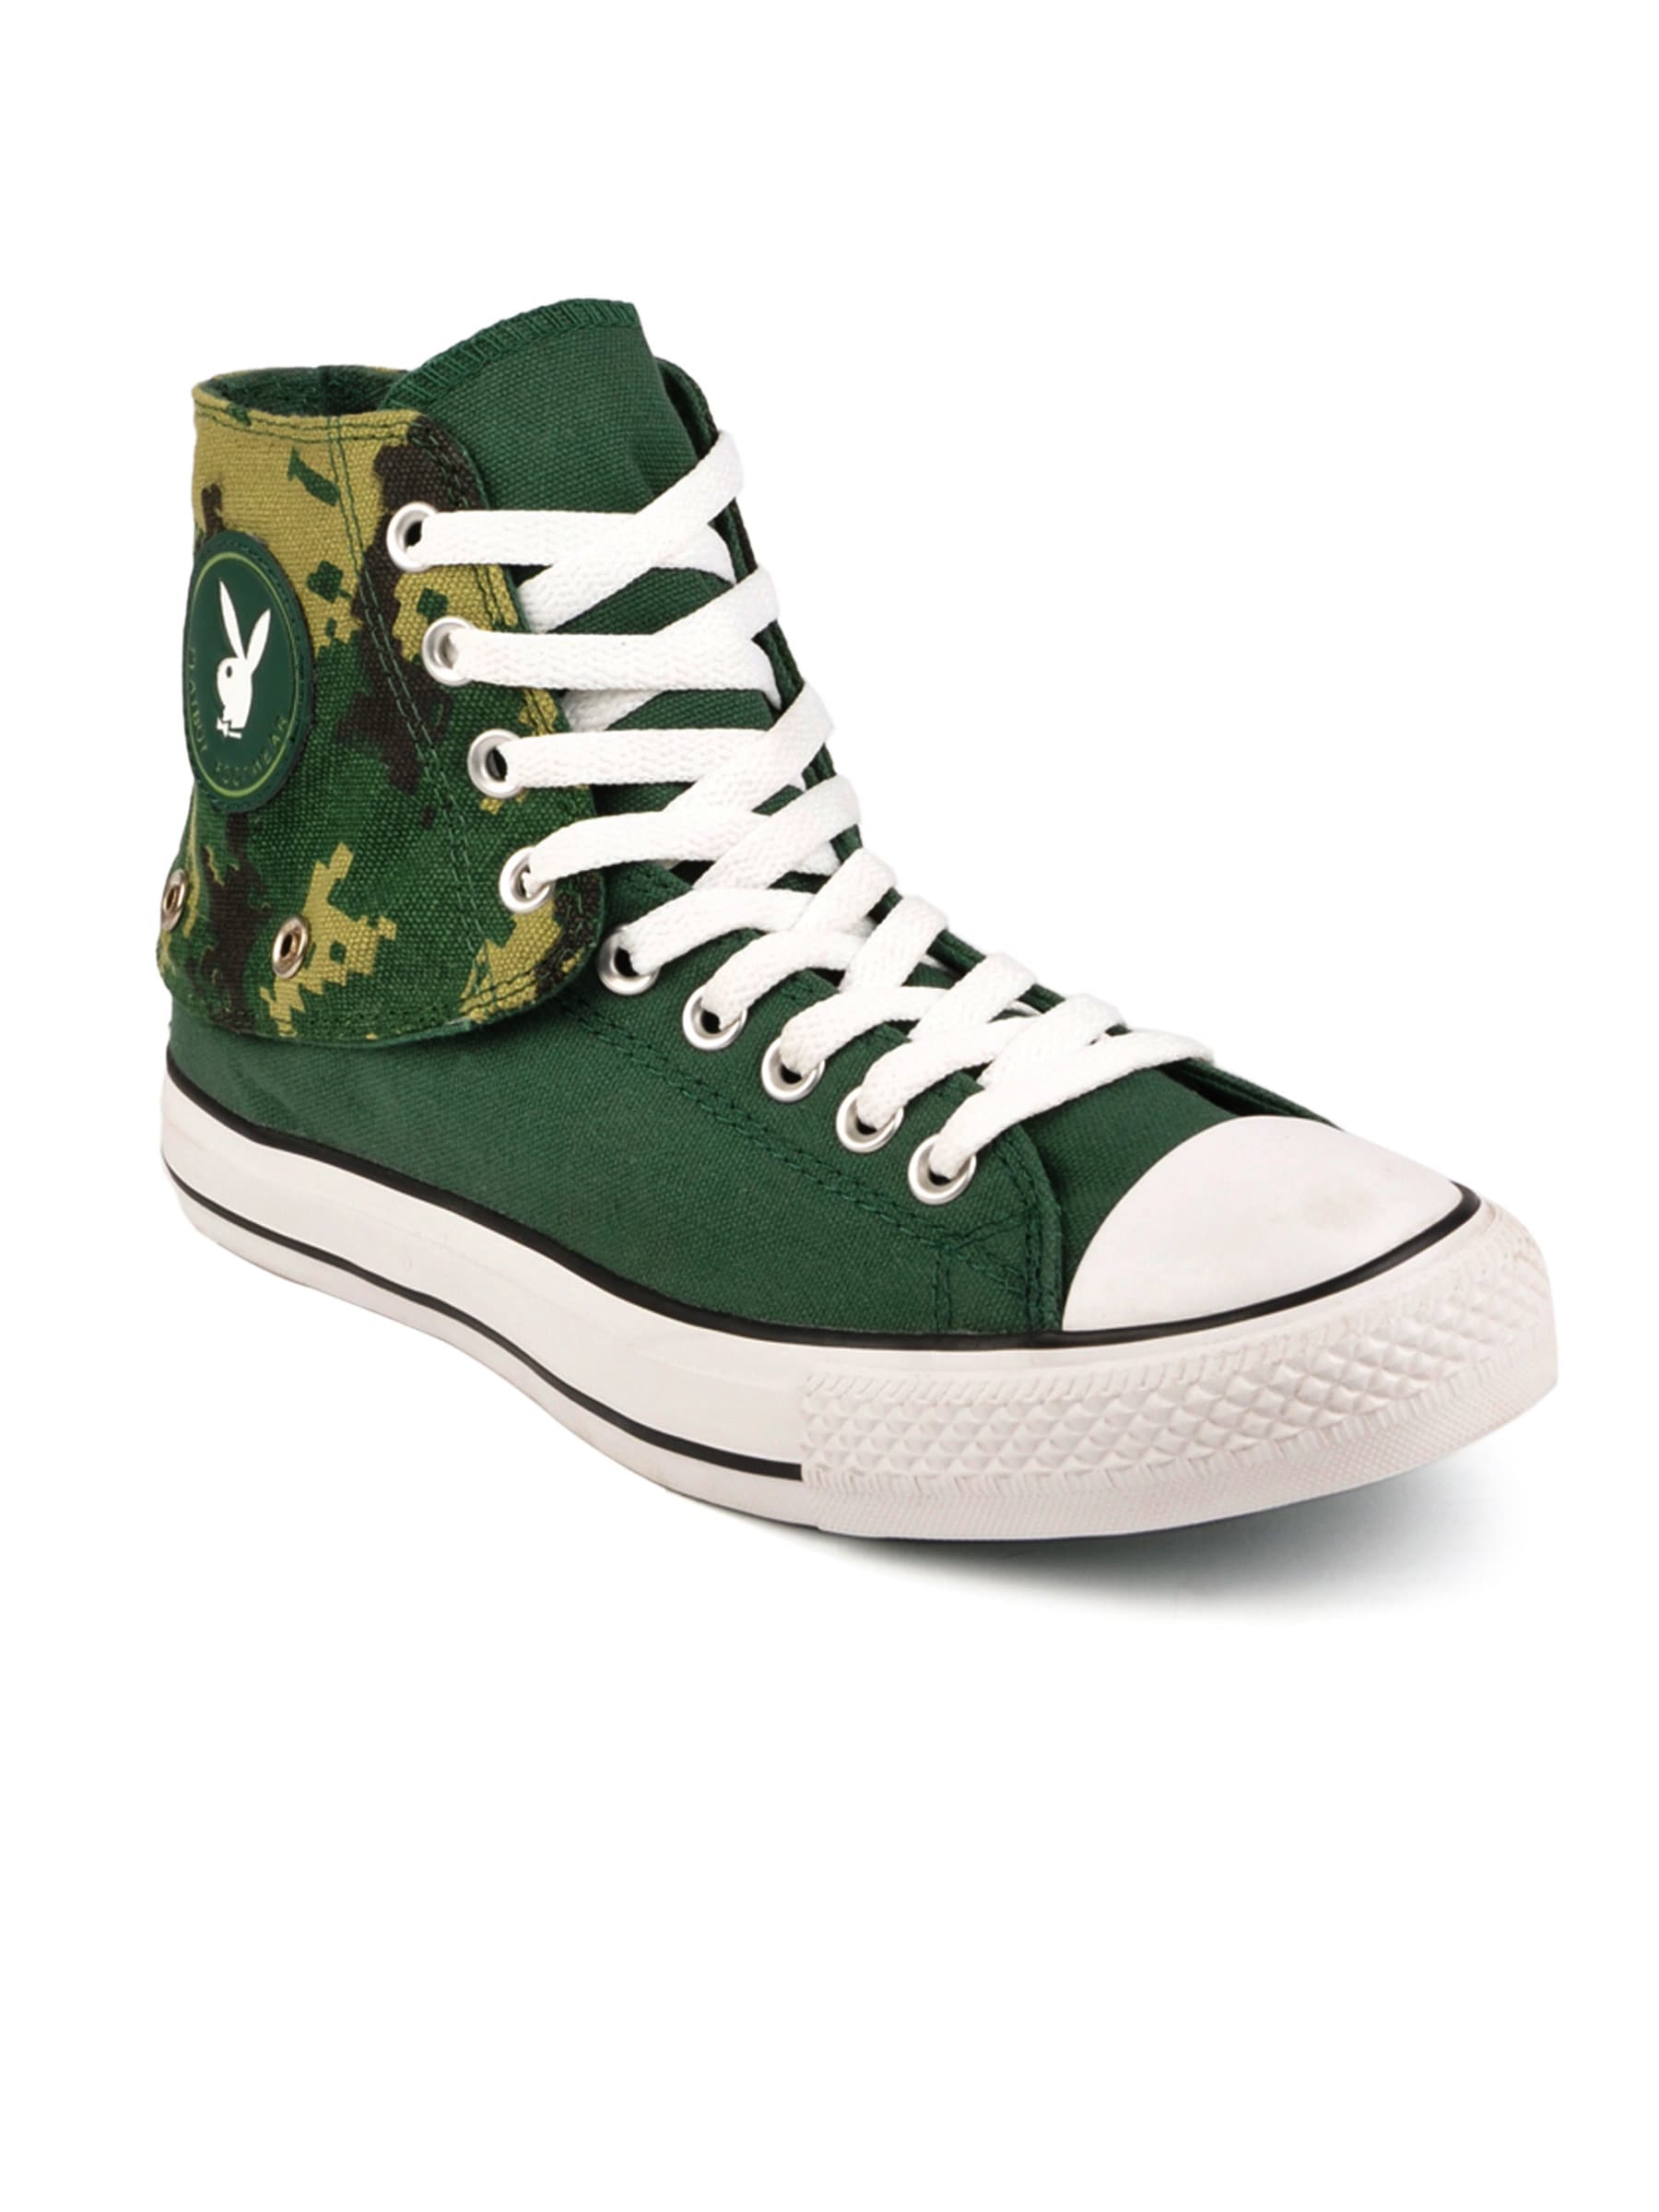 Playboy Men Casual Green Casual Shoes